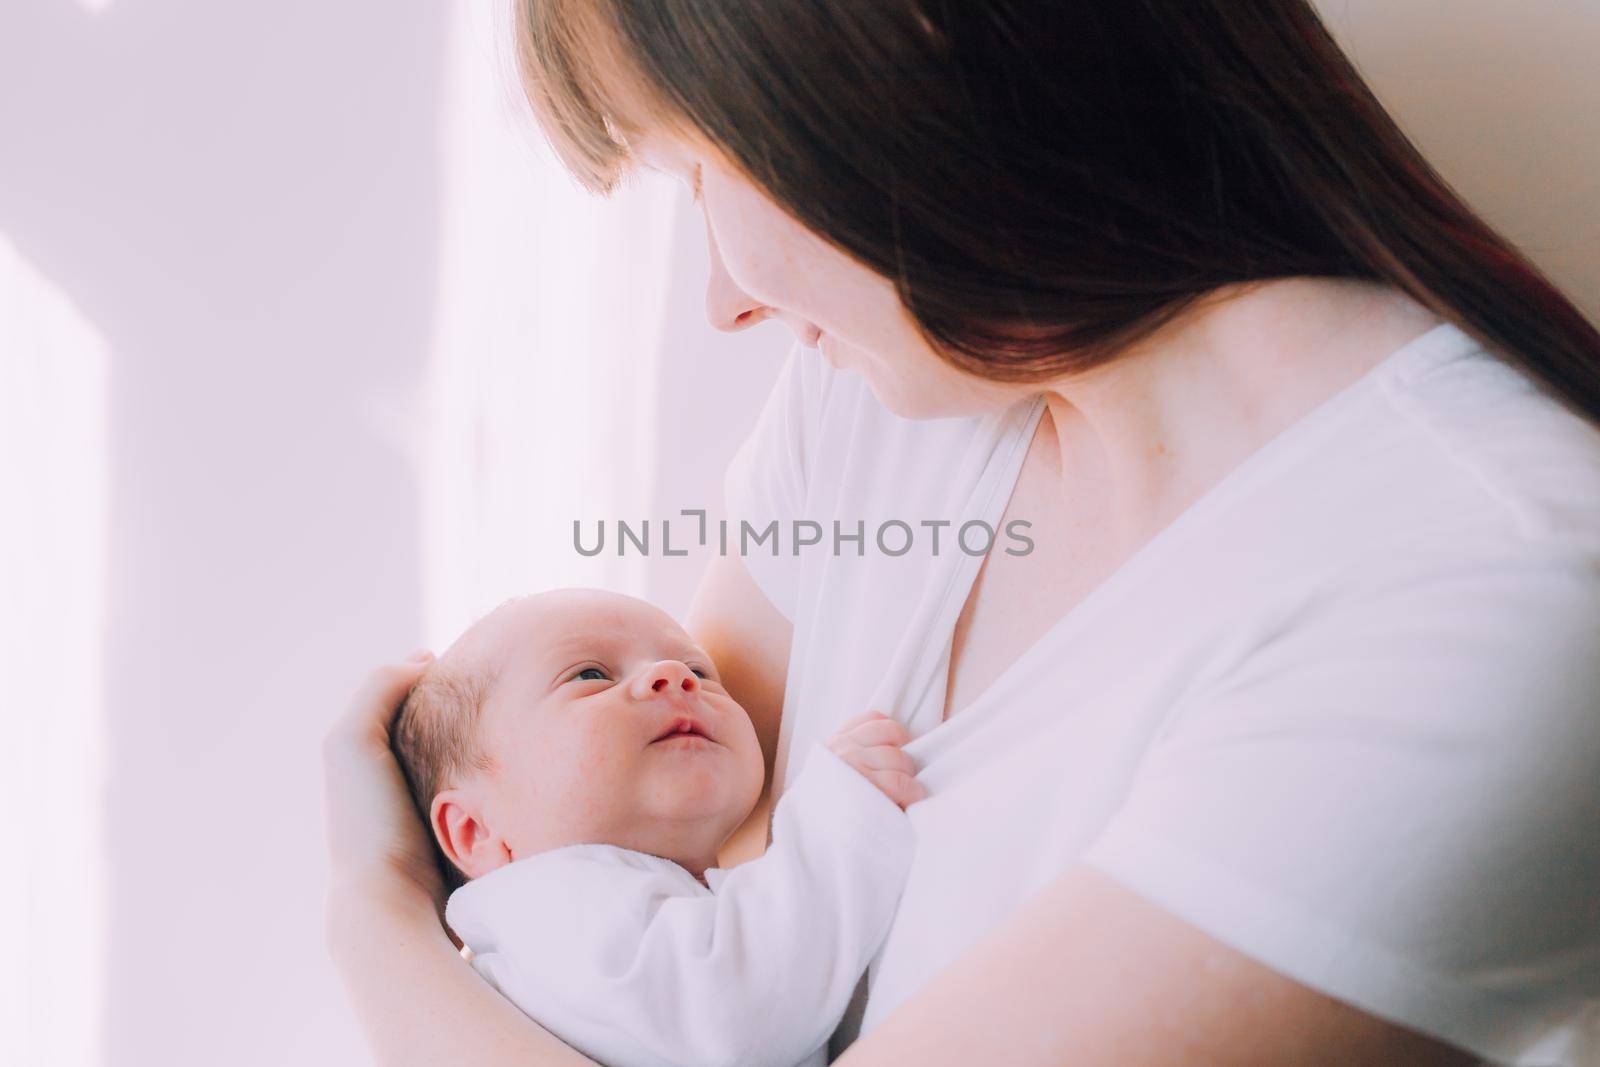 Mom holds the baby in her arms lifestyle . Mother's love for her son. A newborn baby. by alenka2194